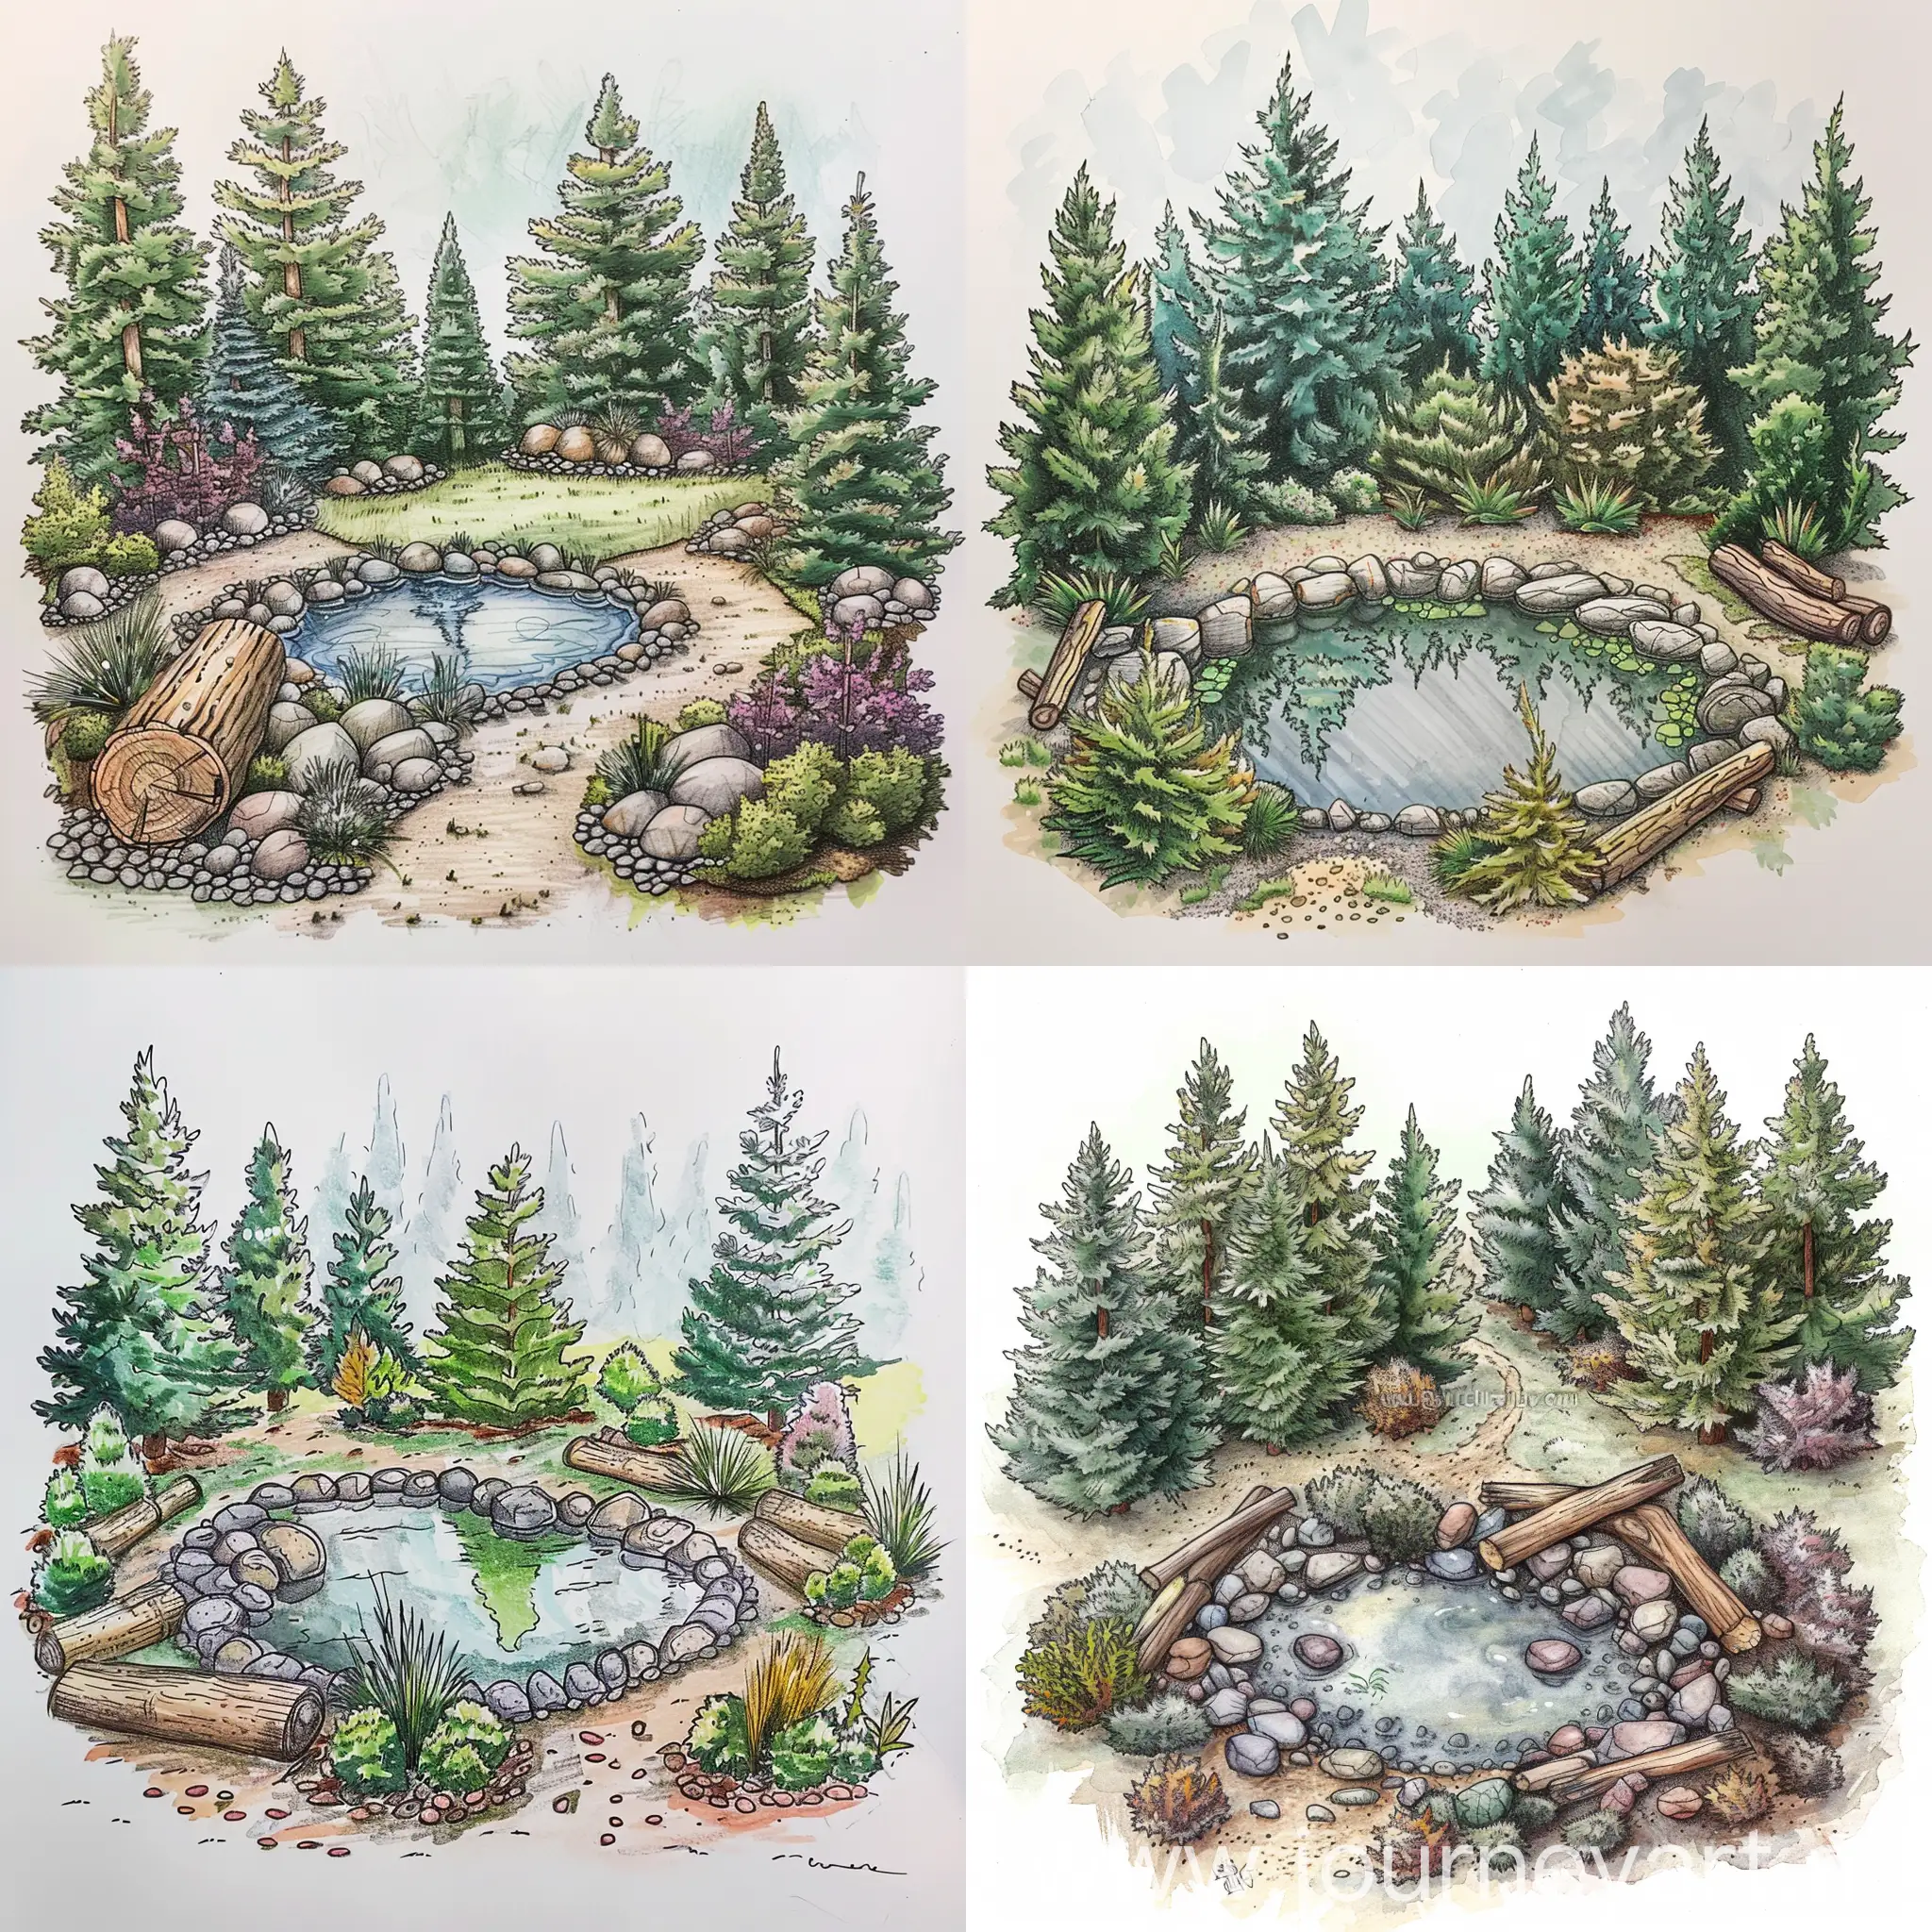 Draw a sketch, a rural landscape with a pond decorated with stones and logs. Add different sizes of pebbles Surrounding the pond consists of pine trees and lush trees varies of colors and sizes. The ground has small plants and bushes, and paths can be seen leading to the pond. Make it so that it looks like a beginner artist drew it